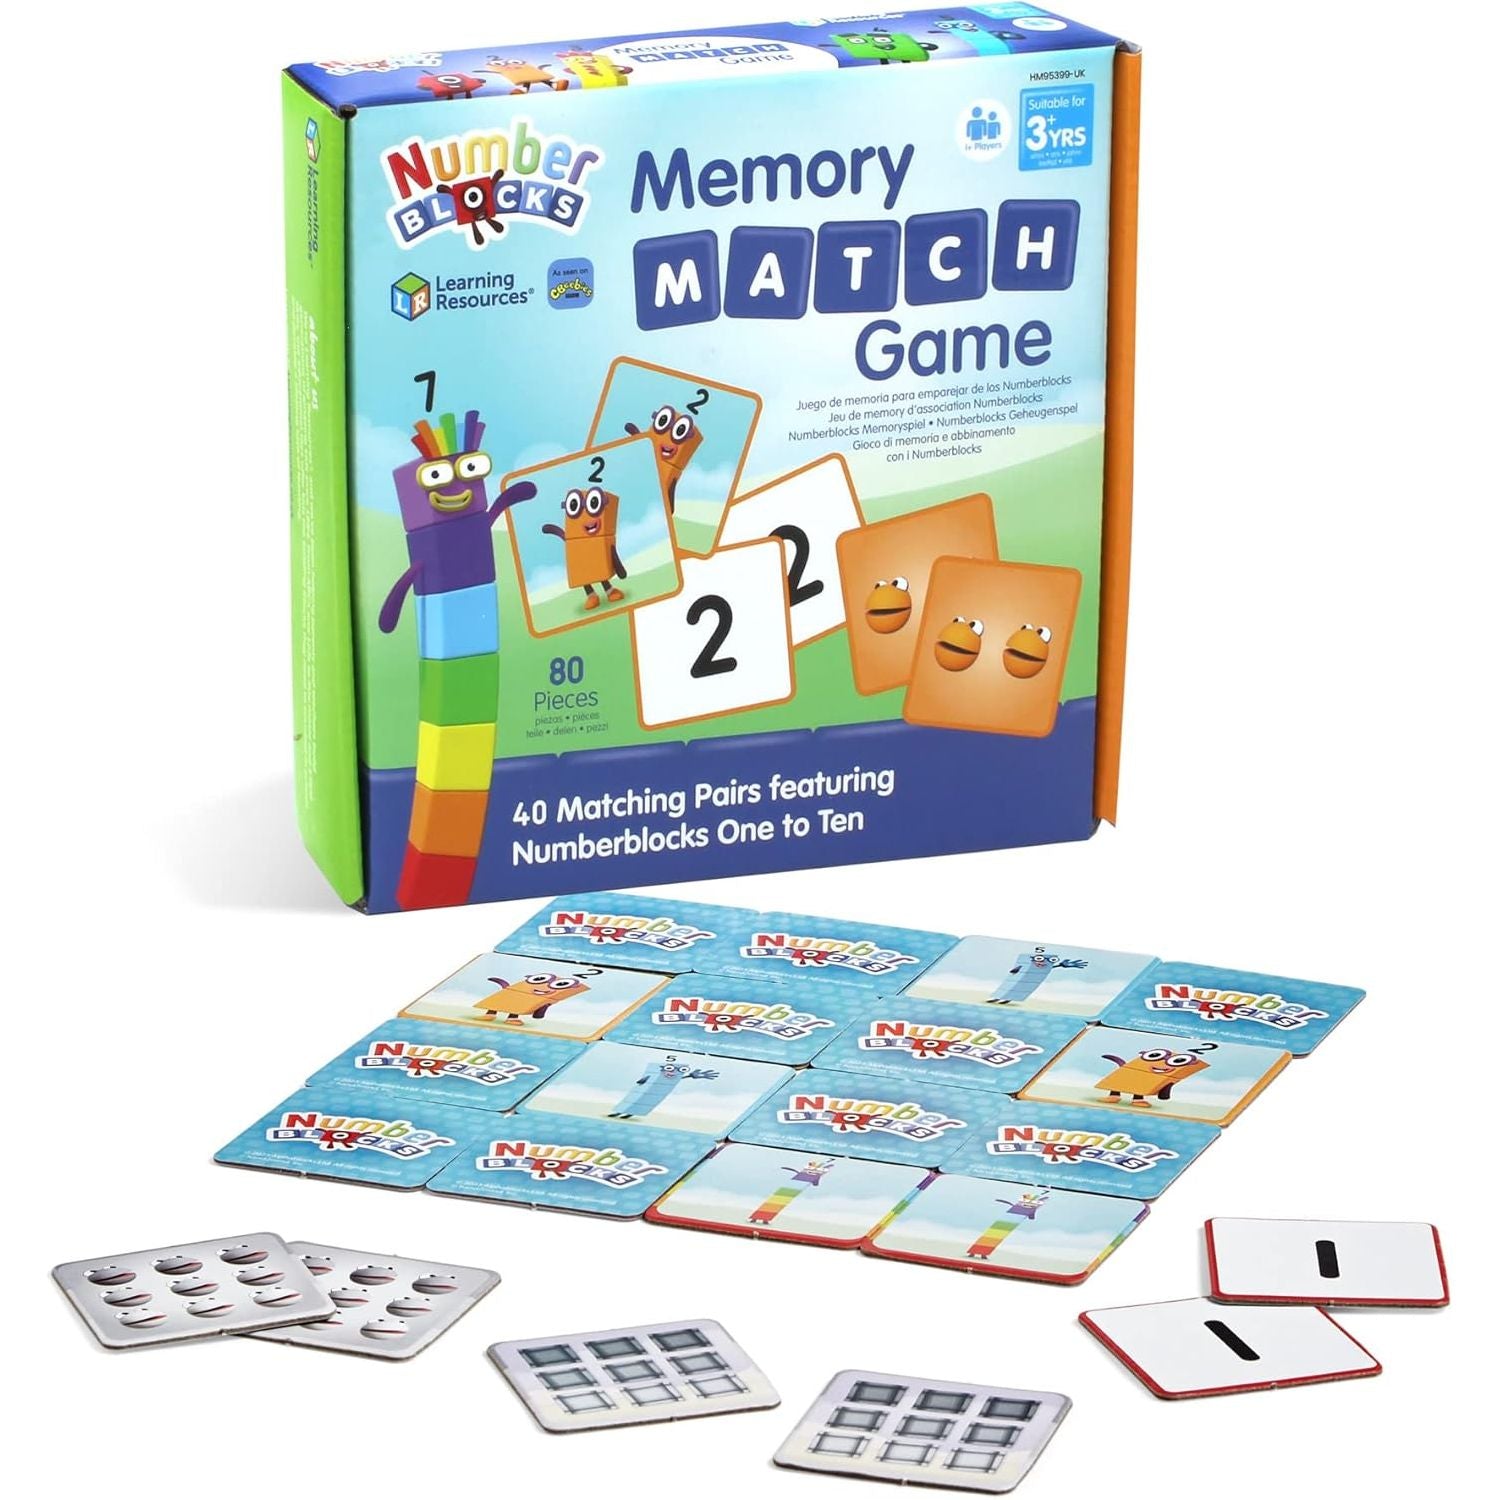 Numberblocks Memory Match Game Learning Resources